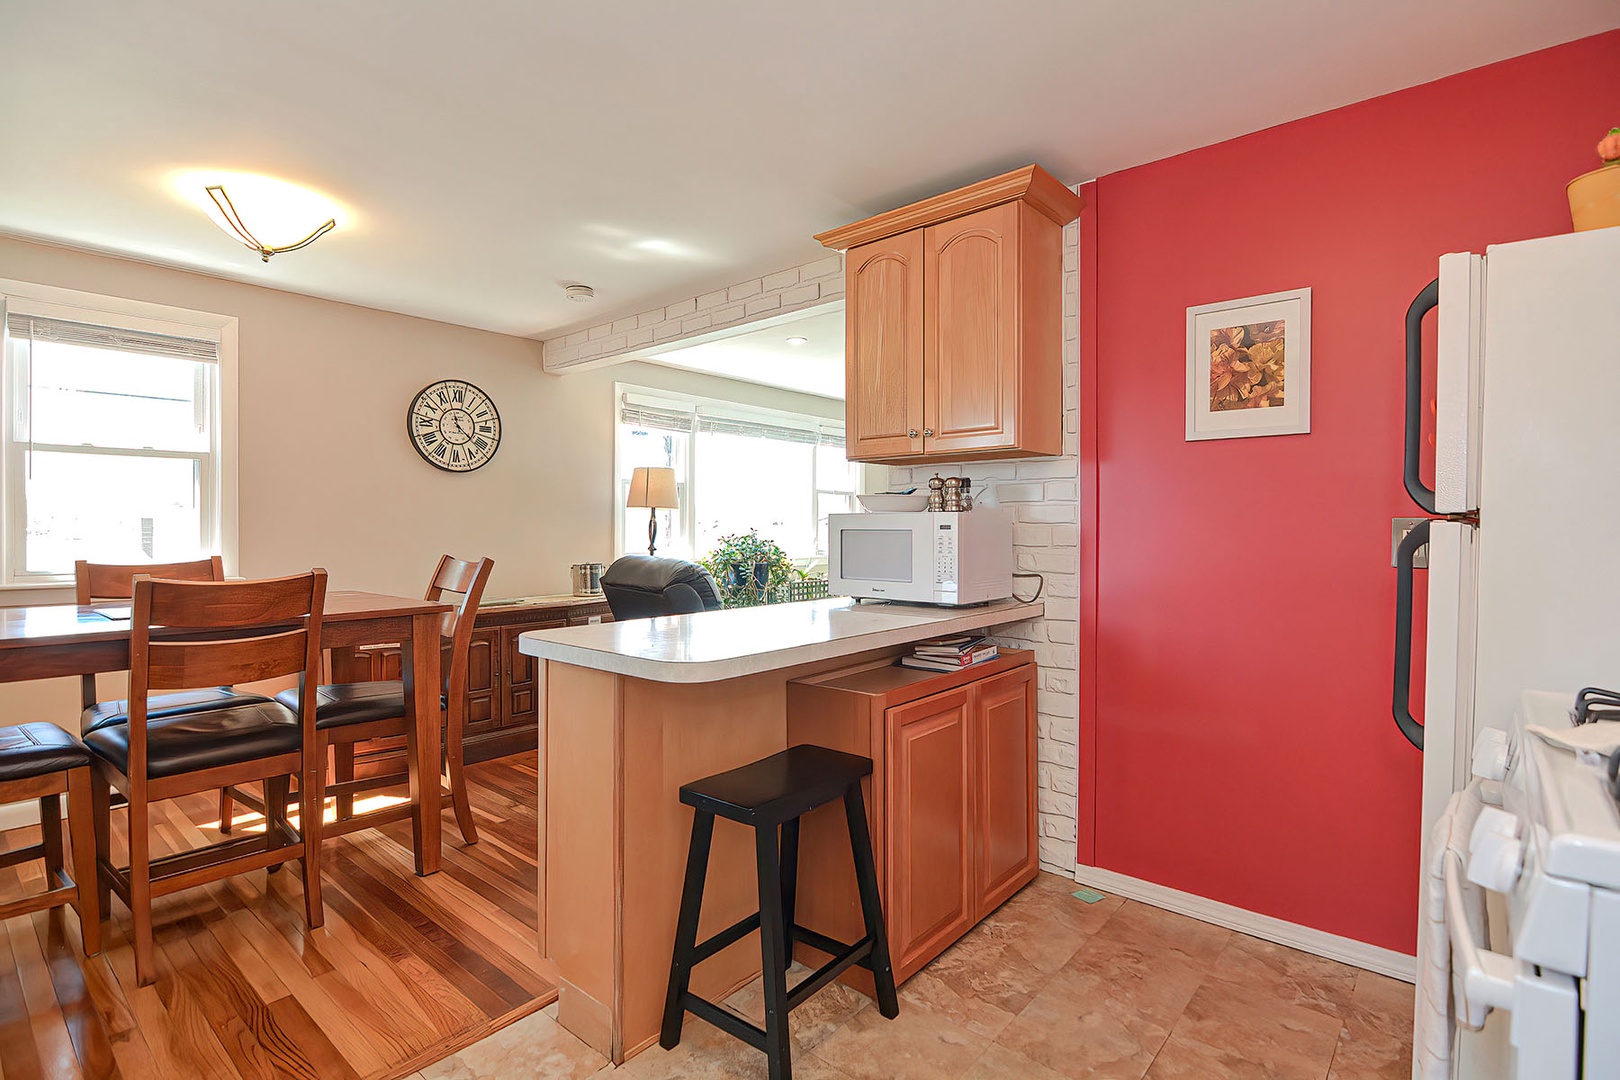 A breakfast bar separates the kitchen and dining rooms.